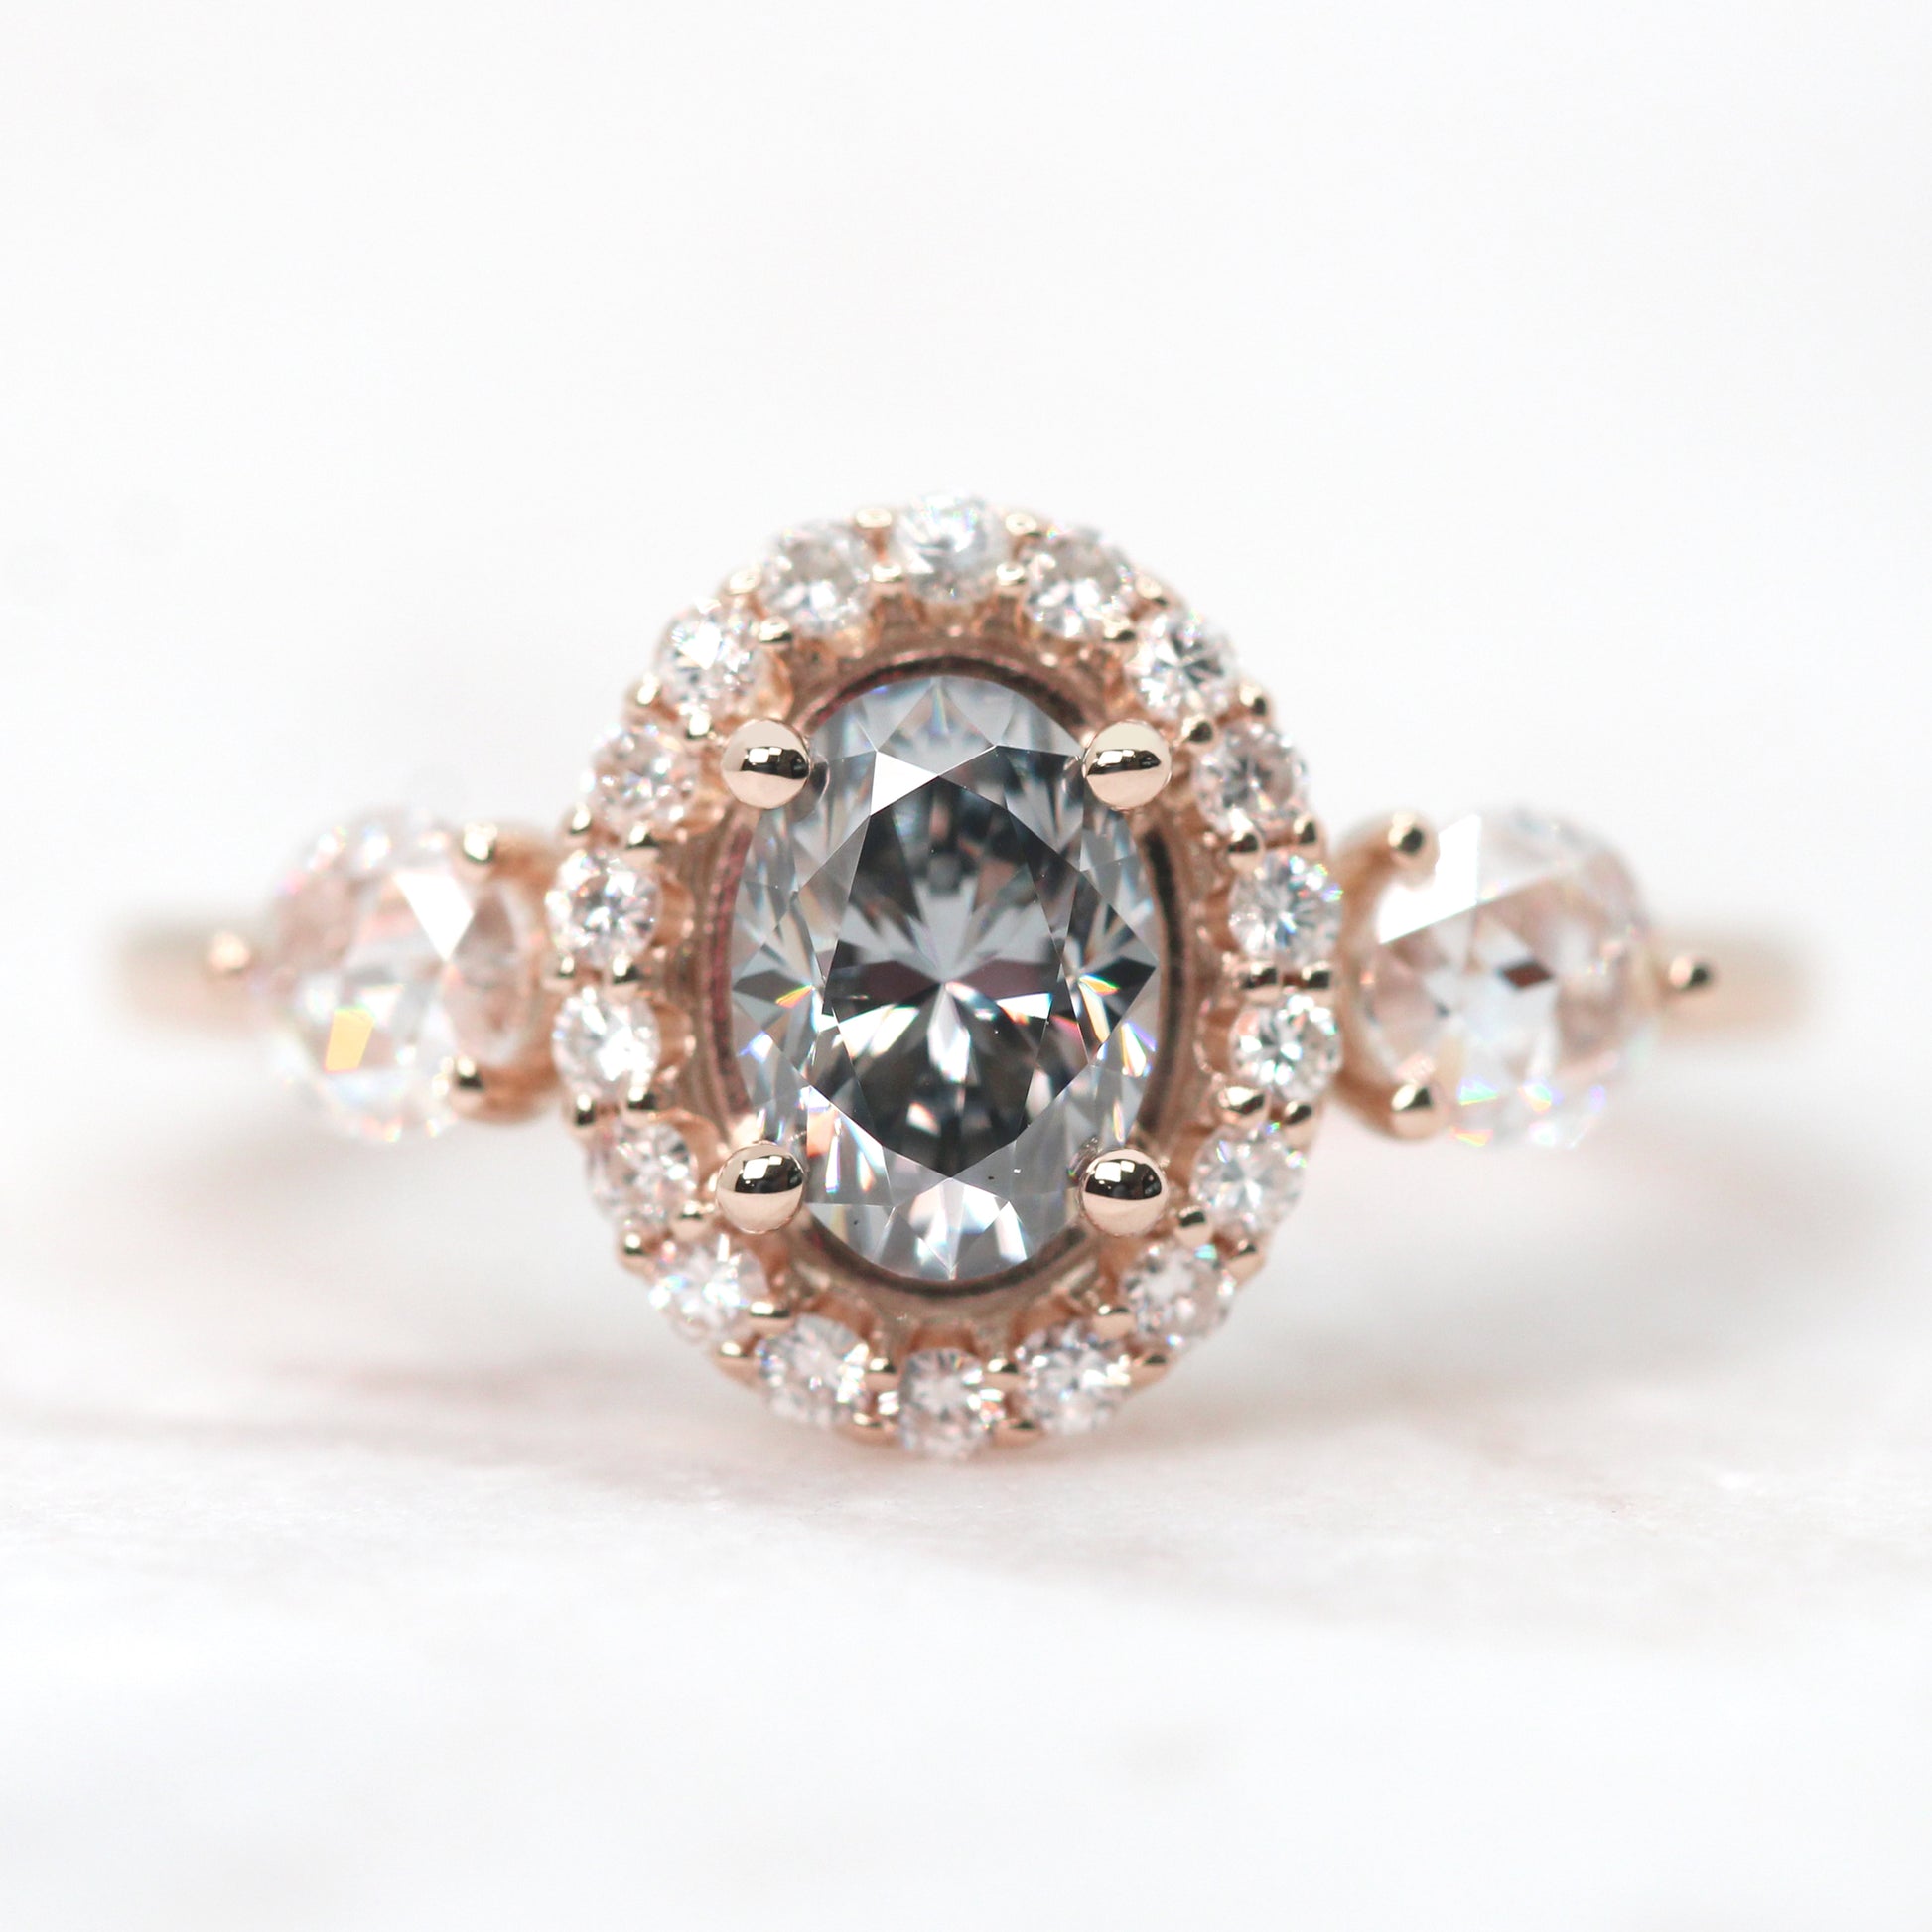 Annalyse Ring with an Oval Gray Moissanite and Moissanite Accents - Made to Order, Choose Your Gold Tone - Midwinter Co. Alternative Bridal Rings and Modern Fine Jewelry